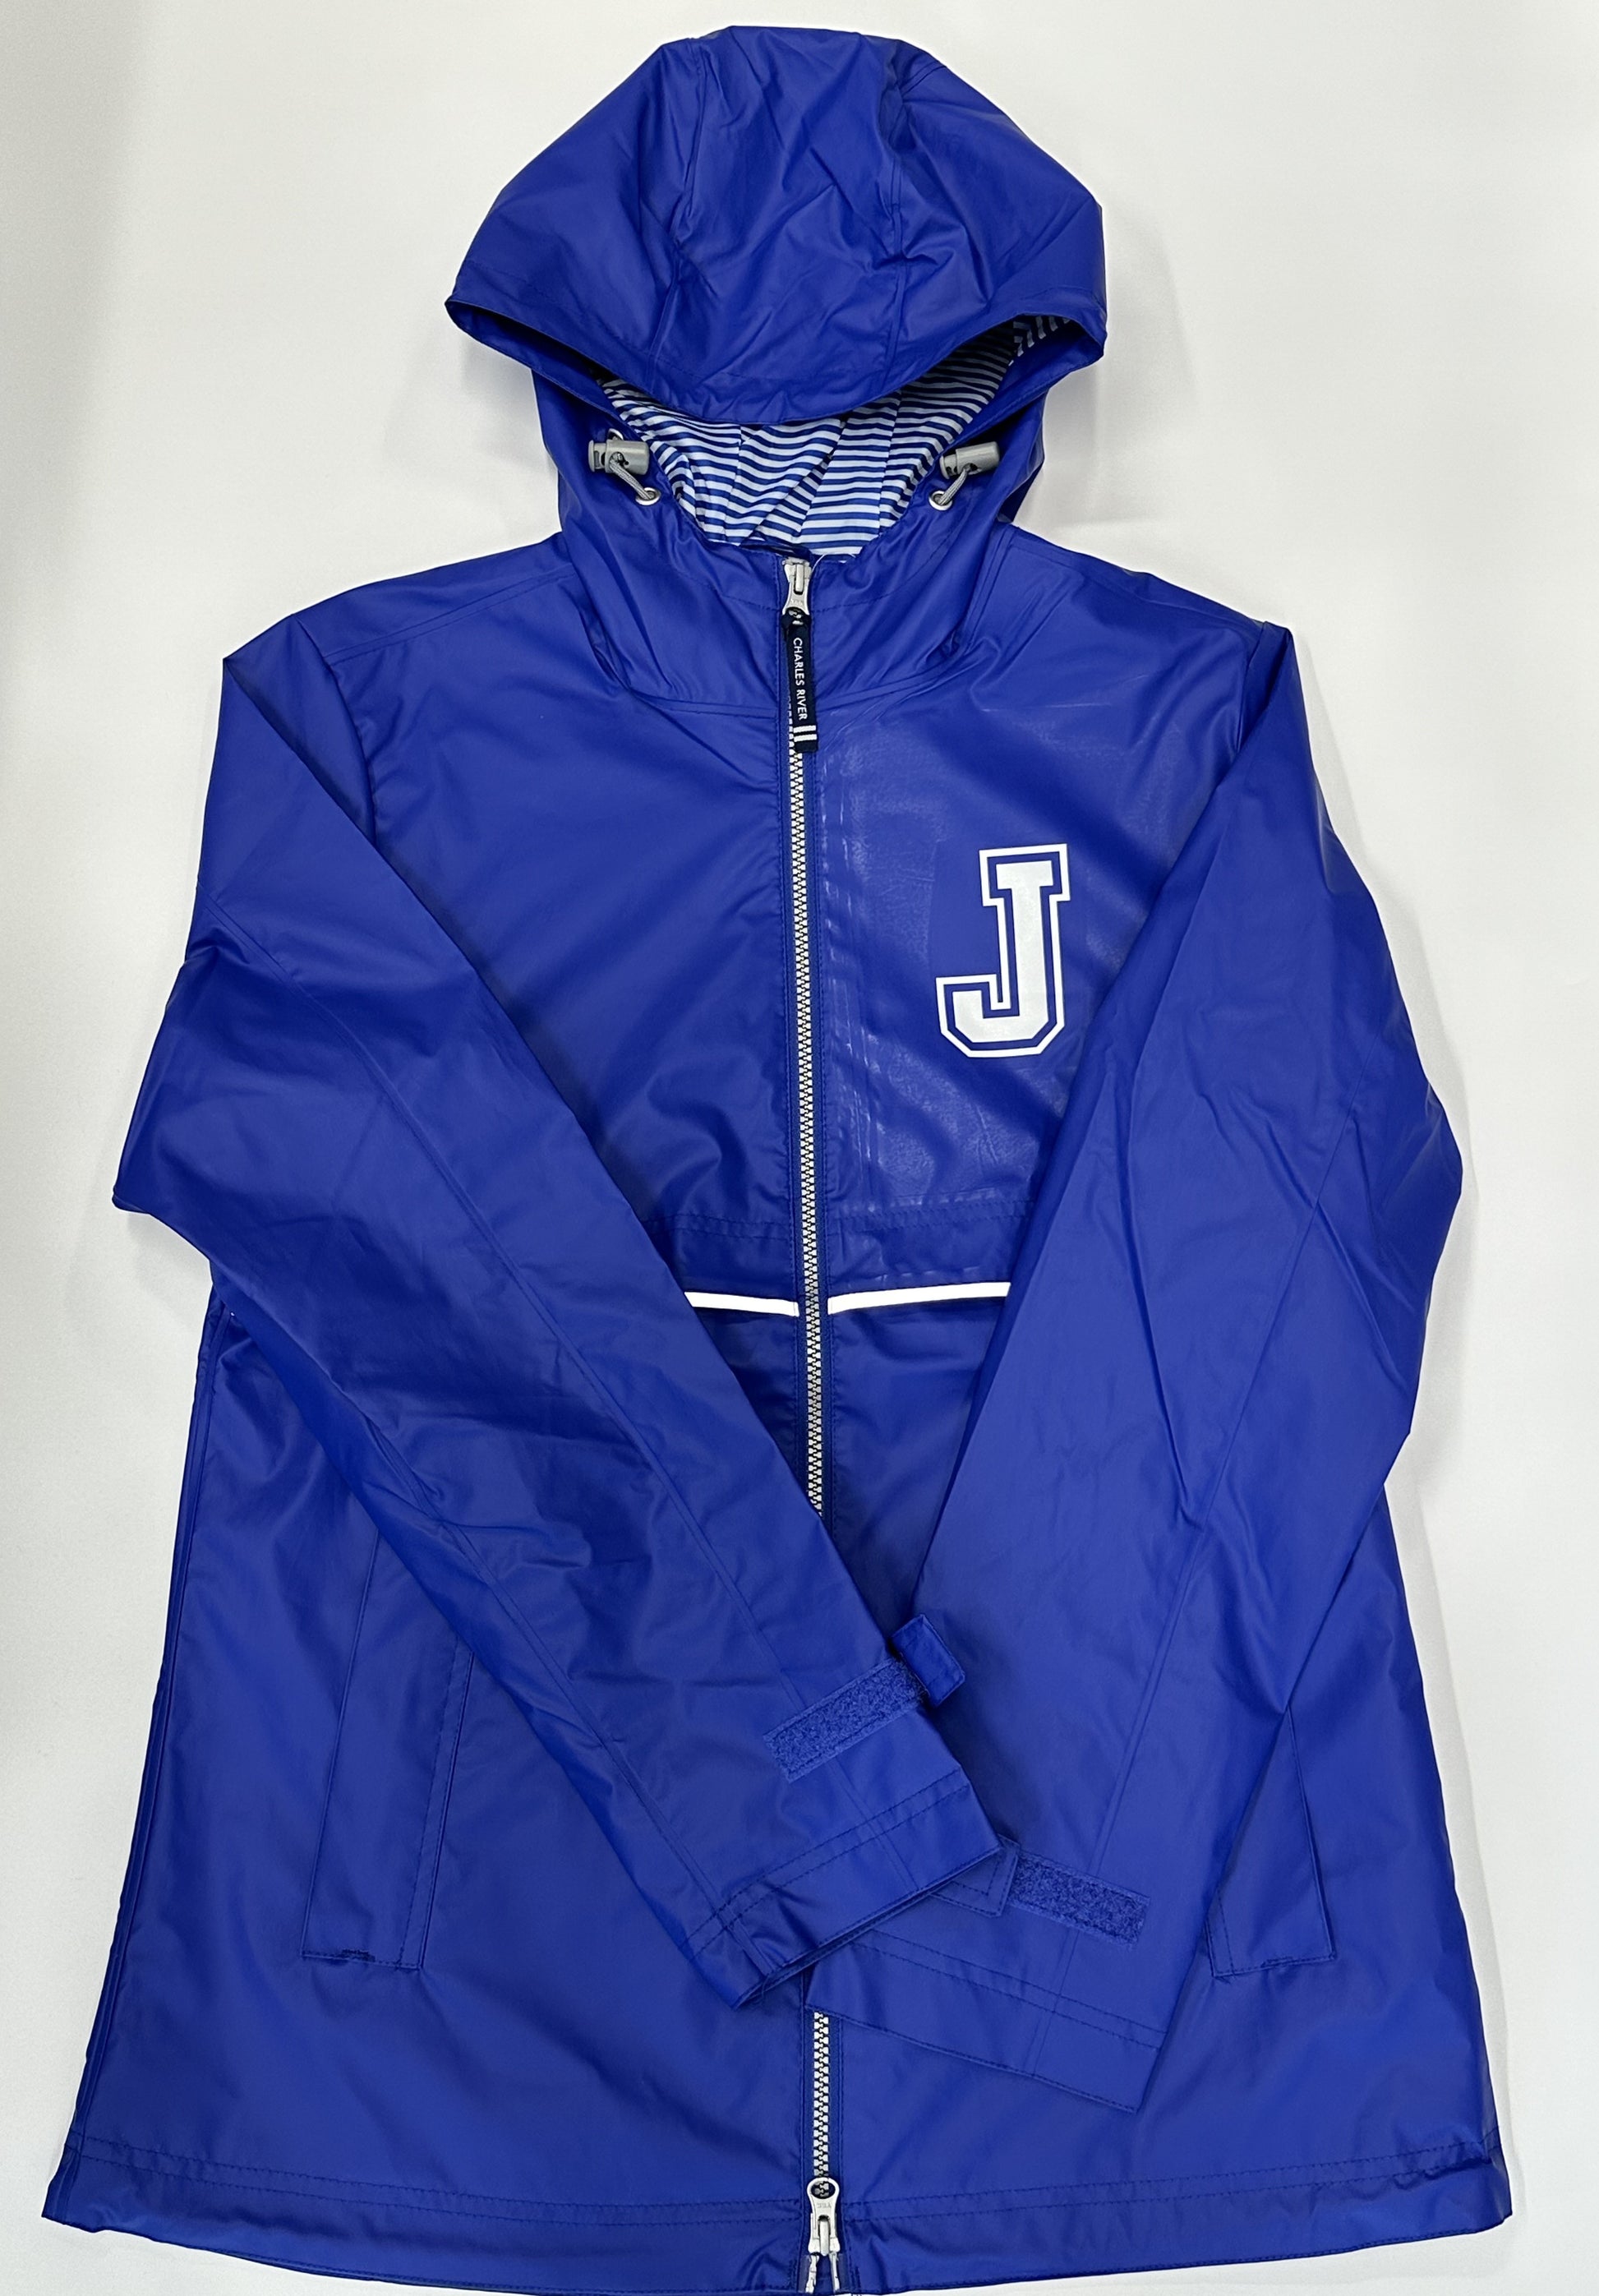 Charles River.  Shell:  100% Polyurethane/Backing:  100% Polyester.  Wind and waterproof w/heat sealed seams for weather protection.  Reflective trims across front & back for visibility.  Royal/White Stripe print lining - 100% polyester.